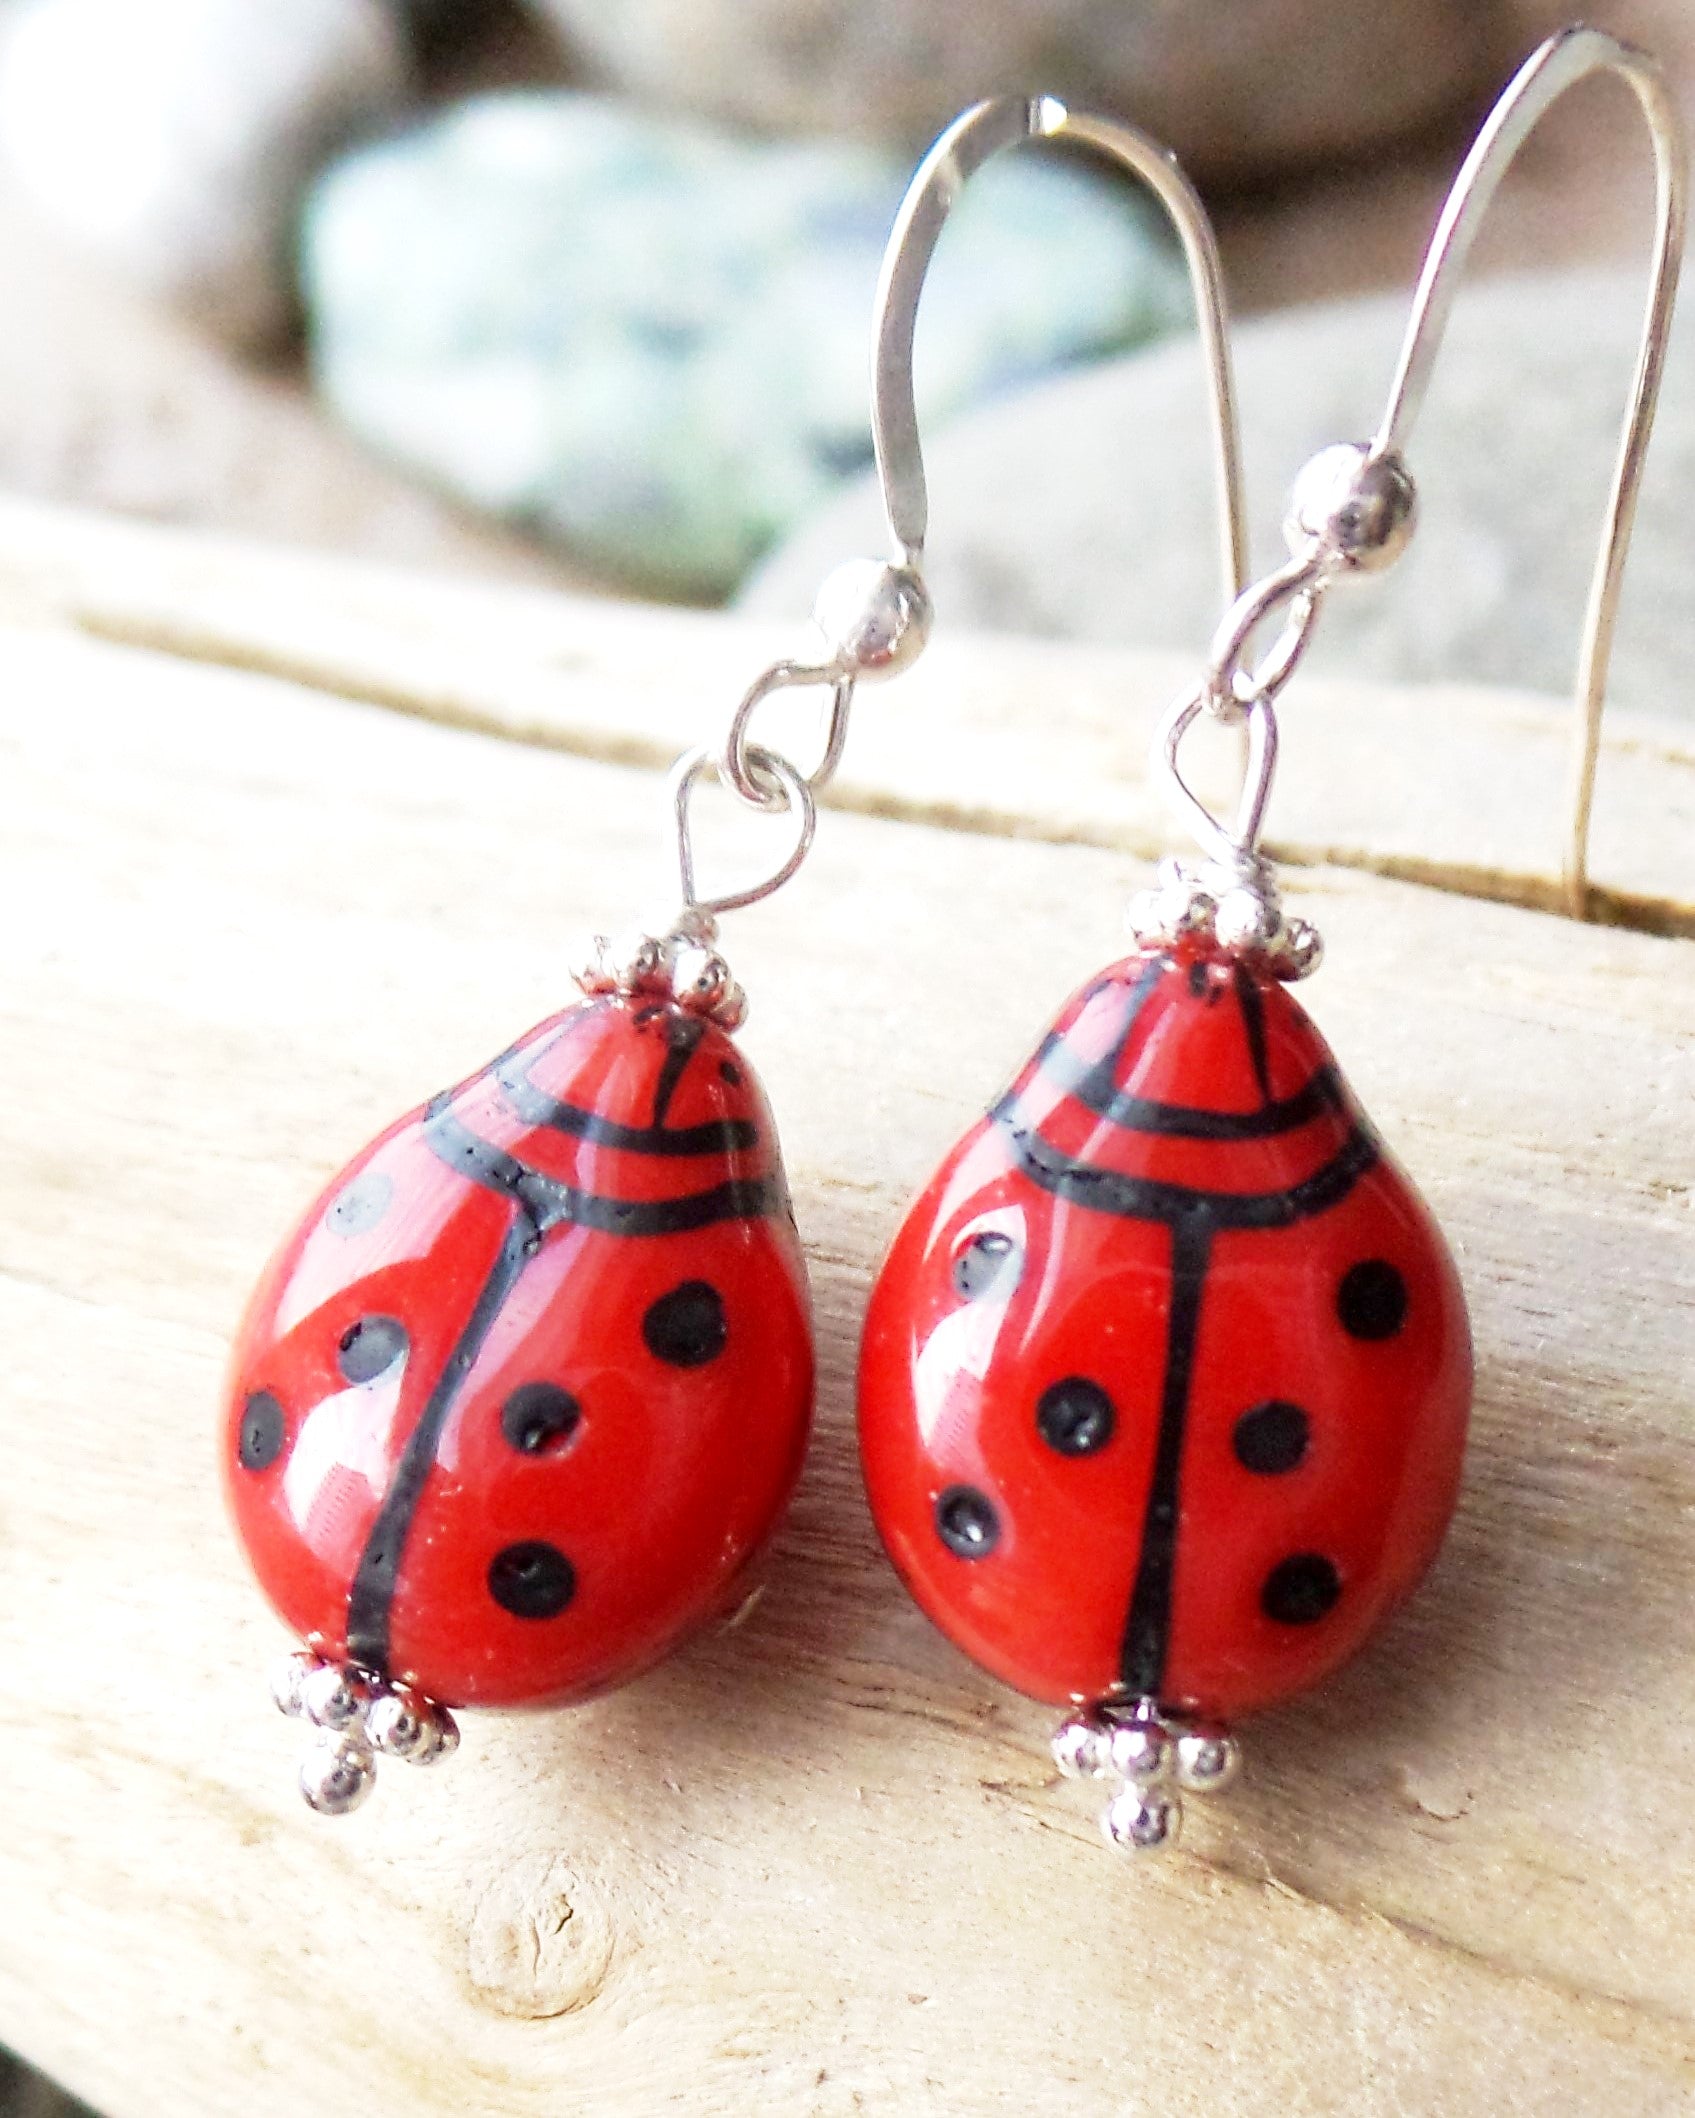 Ladybug Earrings made with solid 925 Sterling Silver and red glass Ladybugs